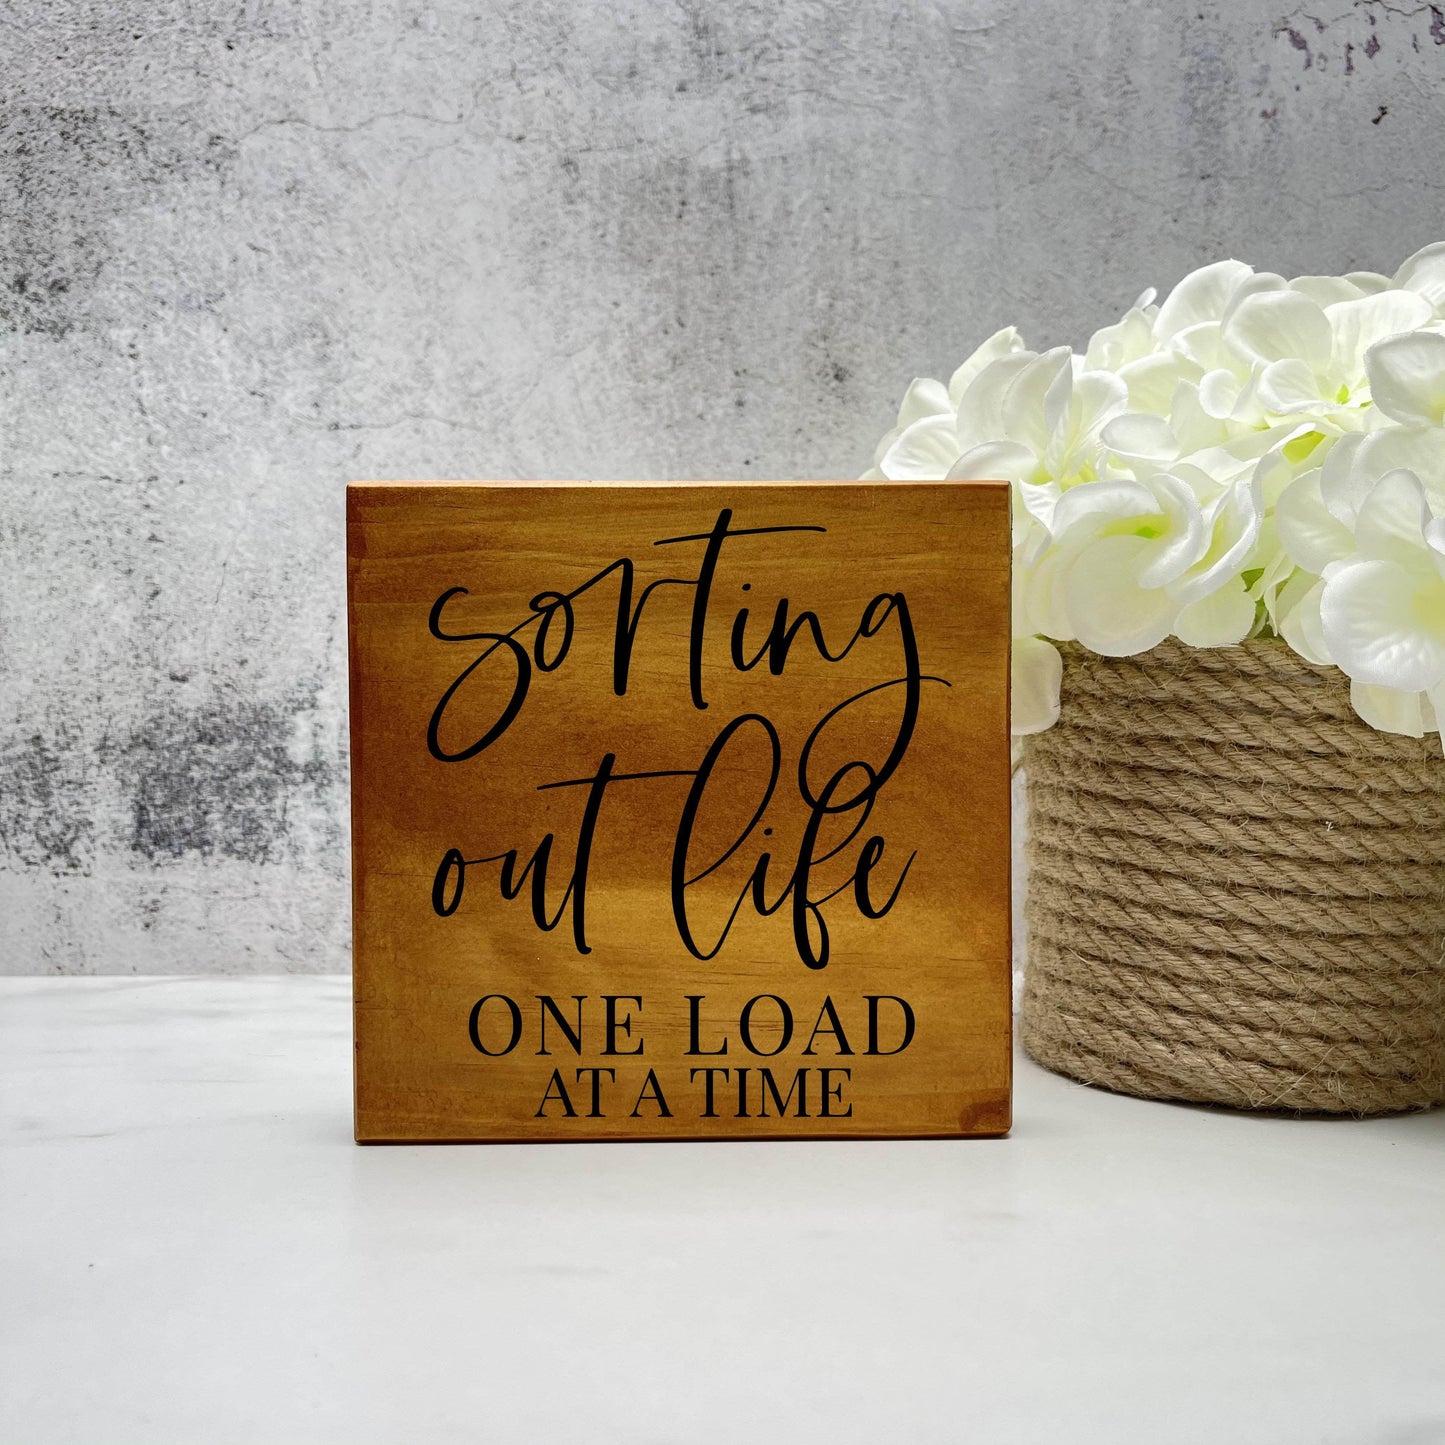 Sorting out life one load at a time, laundry wood sign, laundry decor, home decor